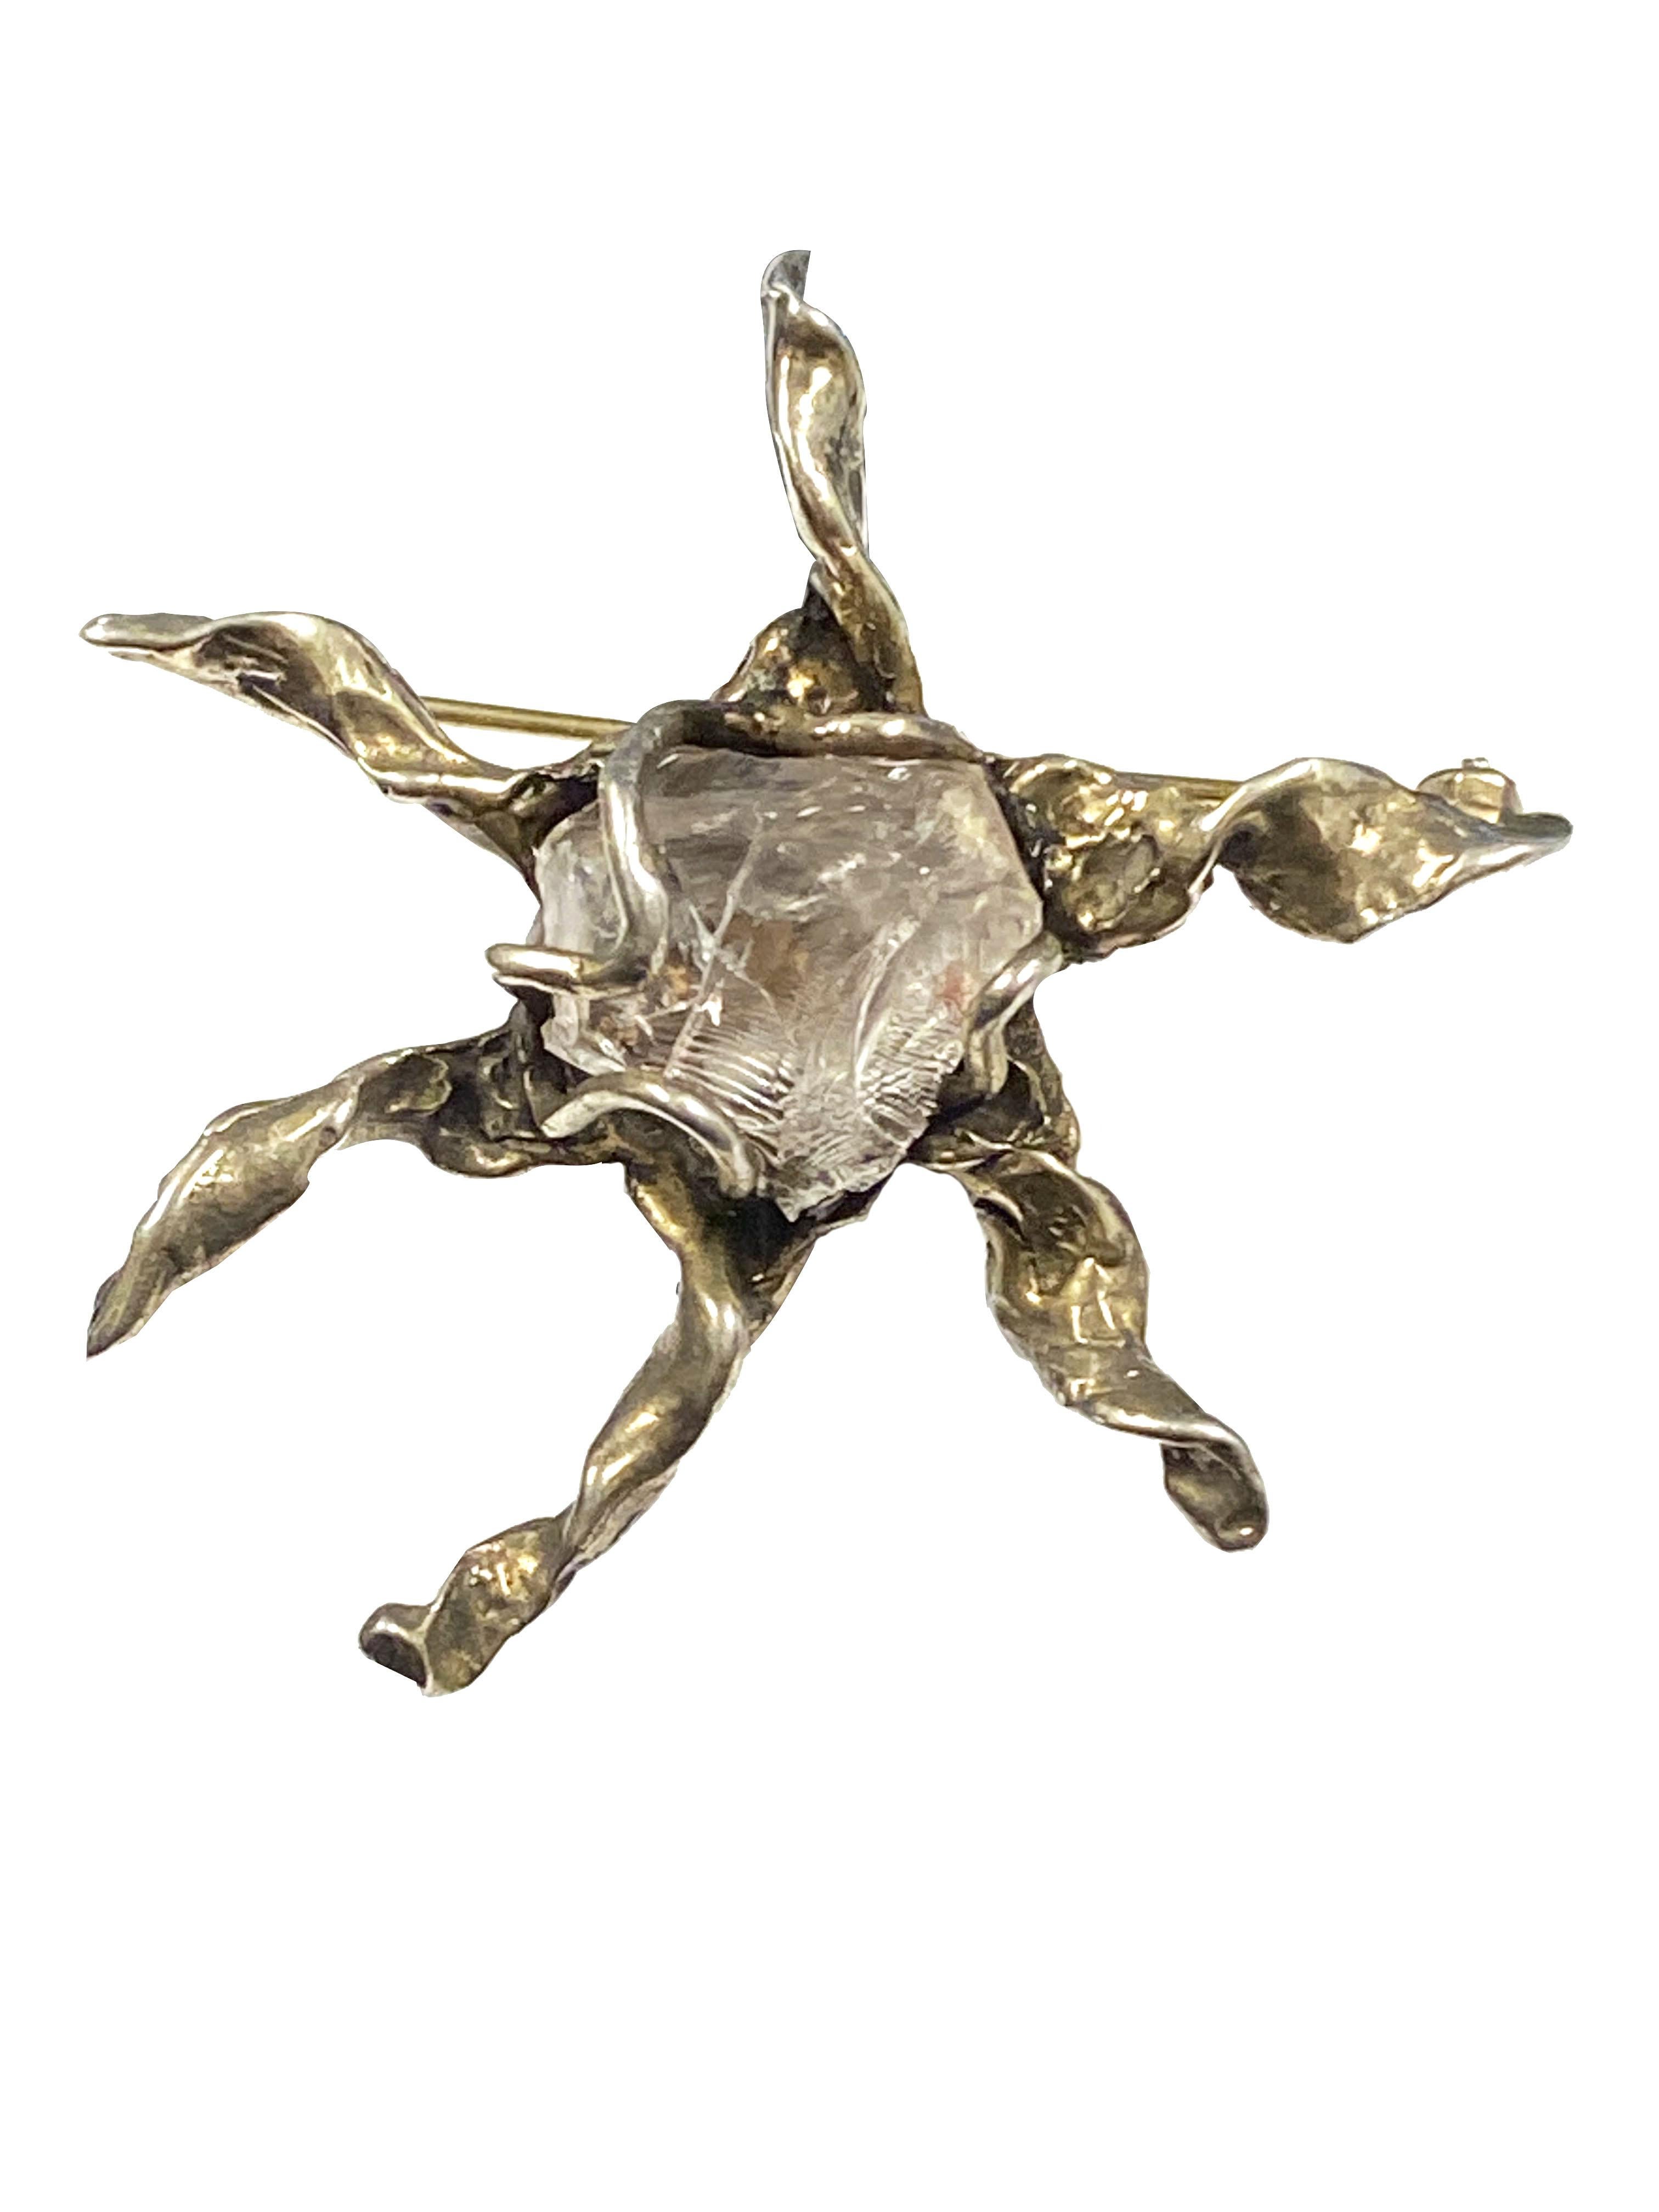 Circa 1970 Arthur King Mid Century Star shaped Sterling Silver Brooch, measuring 2 inches in diameter and centrally set with a Clear Rock Crystal. 